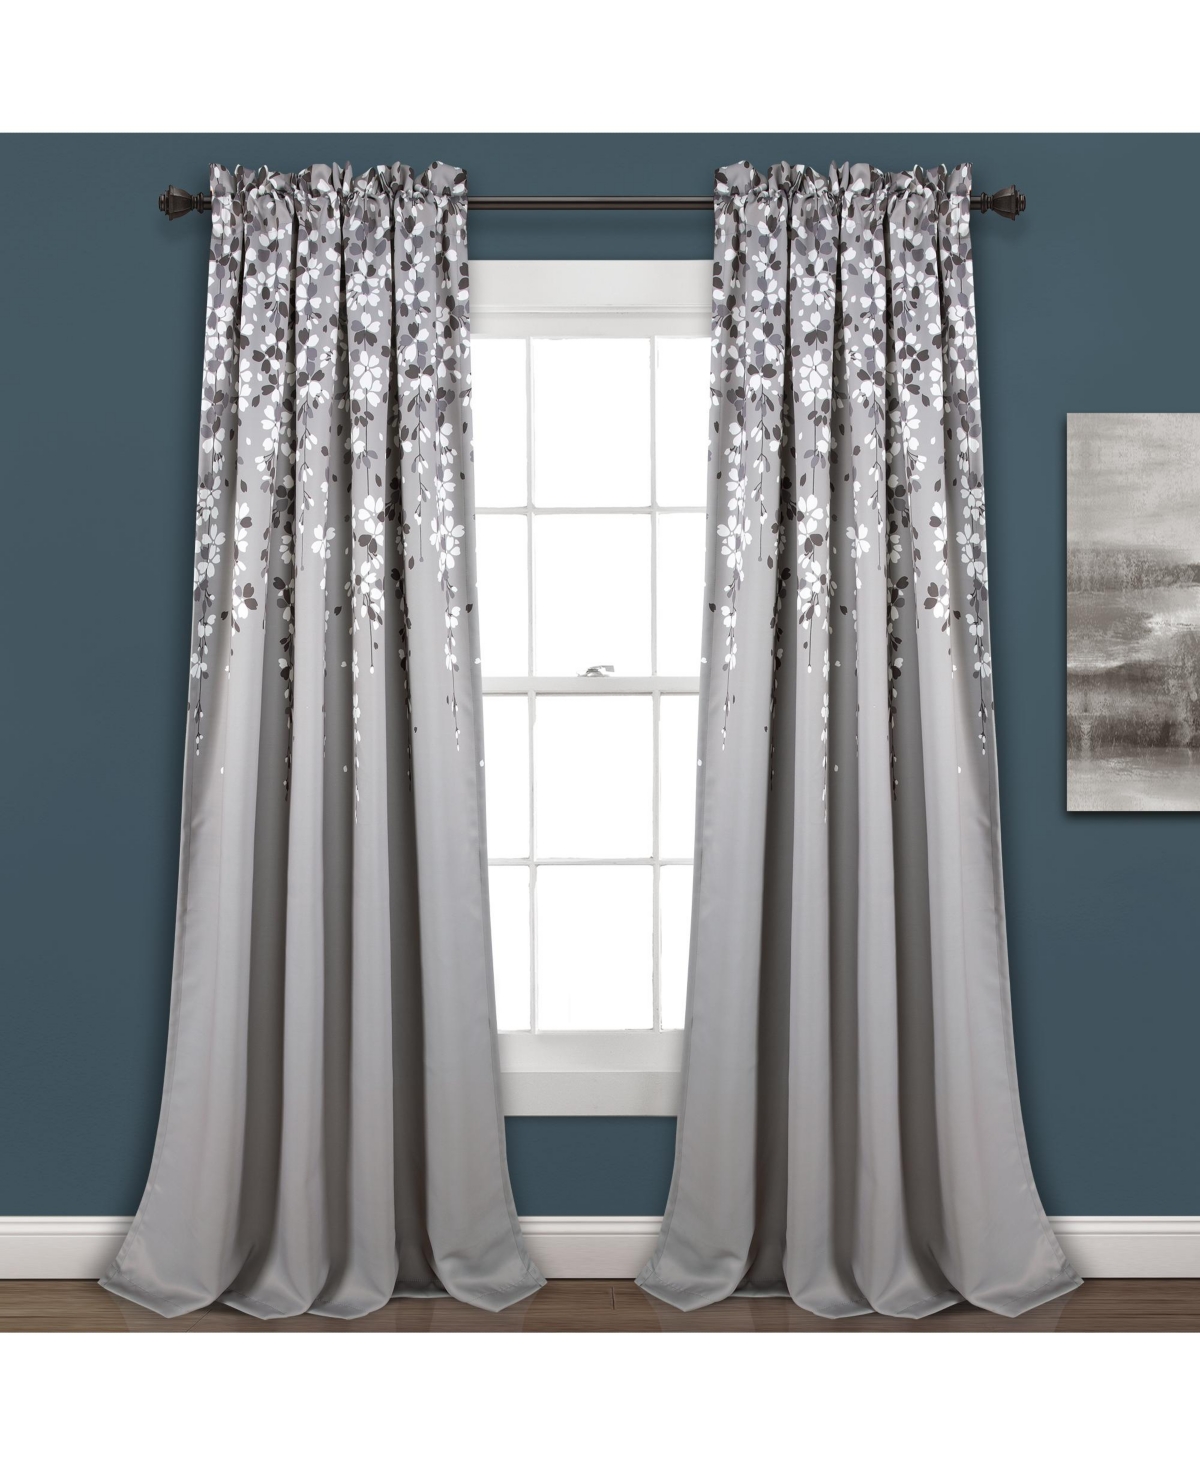 Weeping Flower Light Filtering Window Curtain Panels - Turquoise